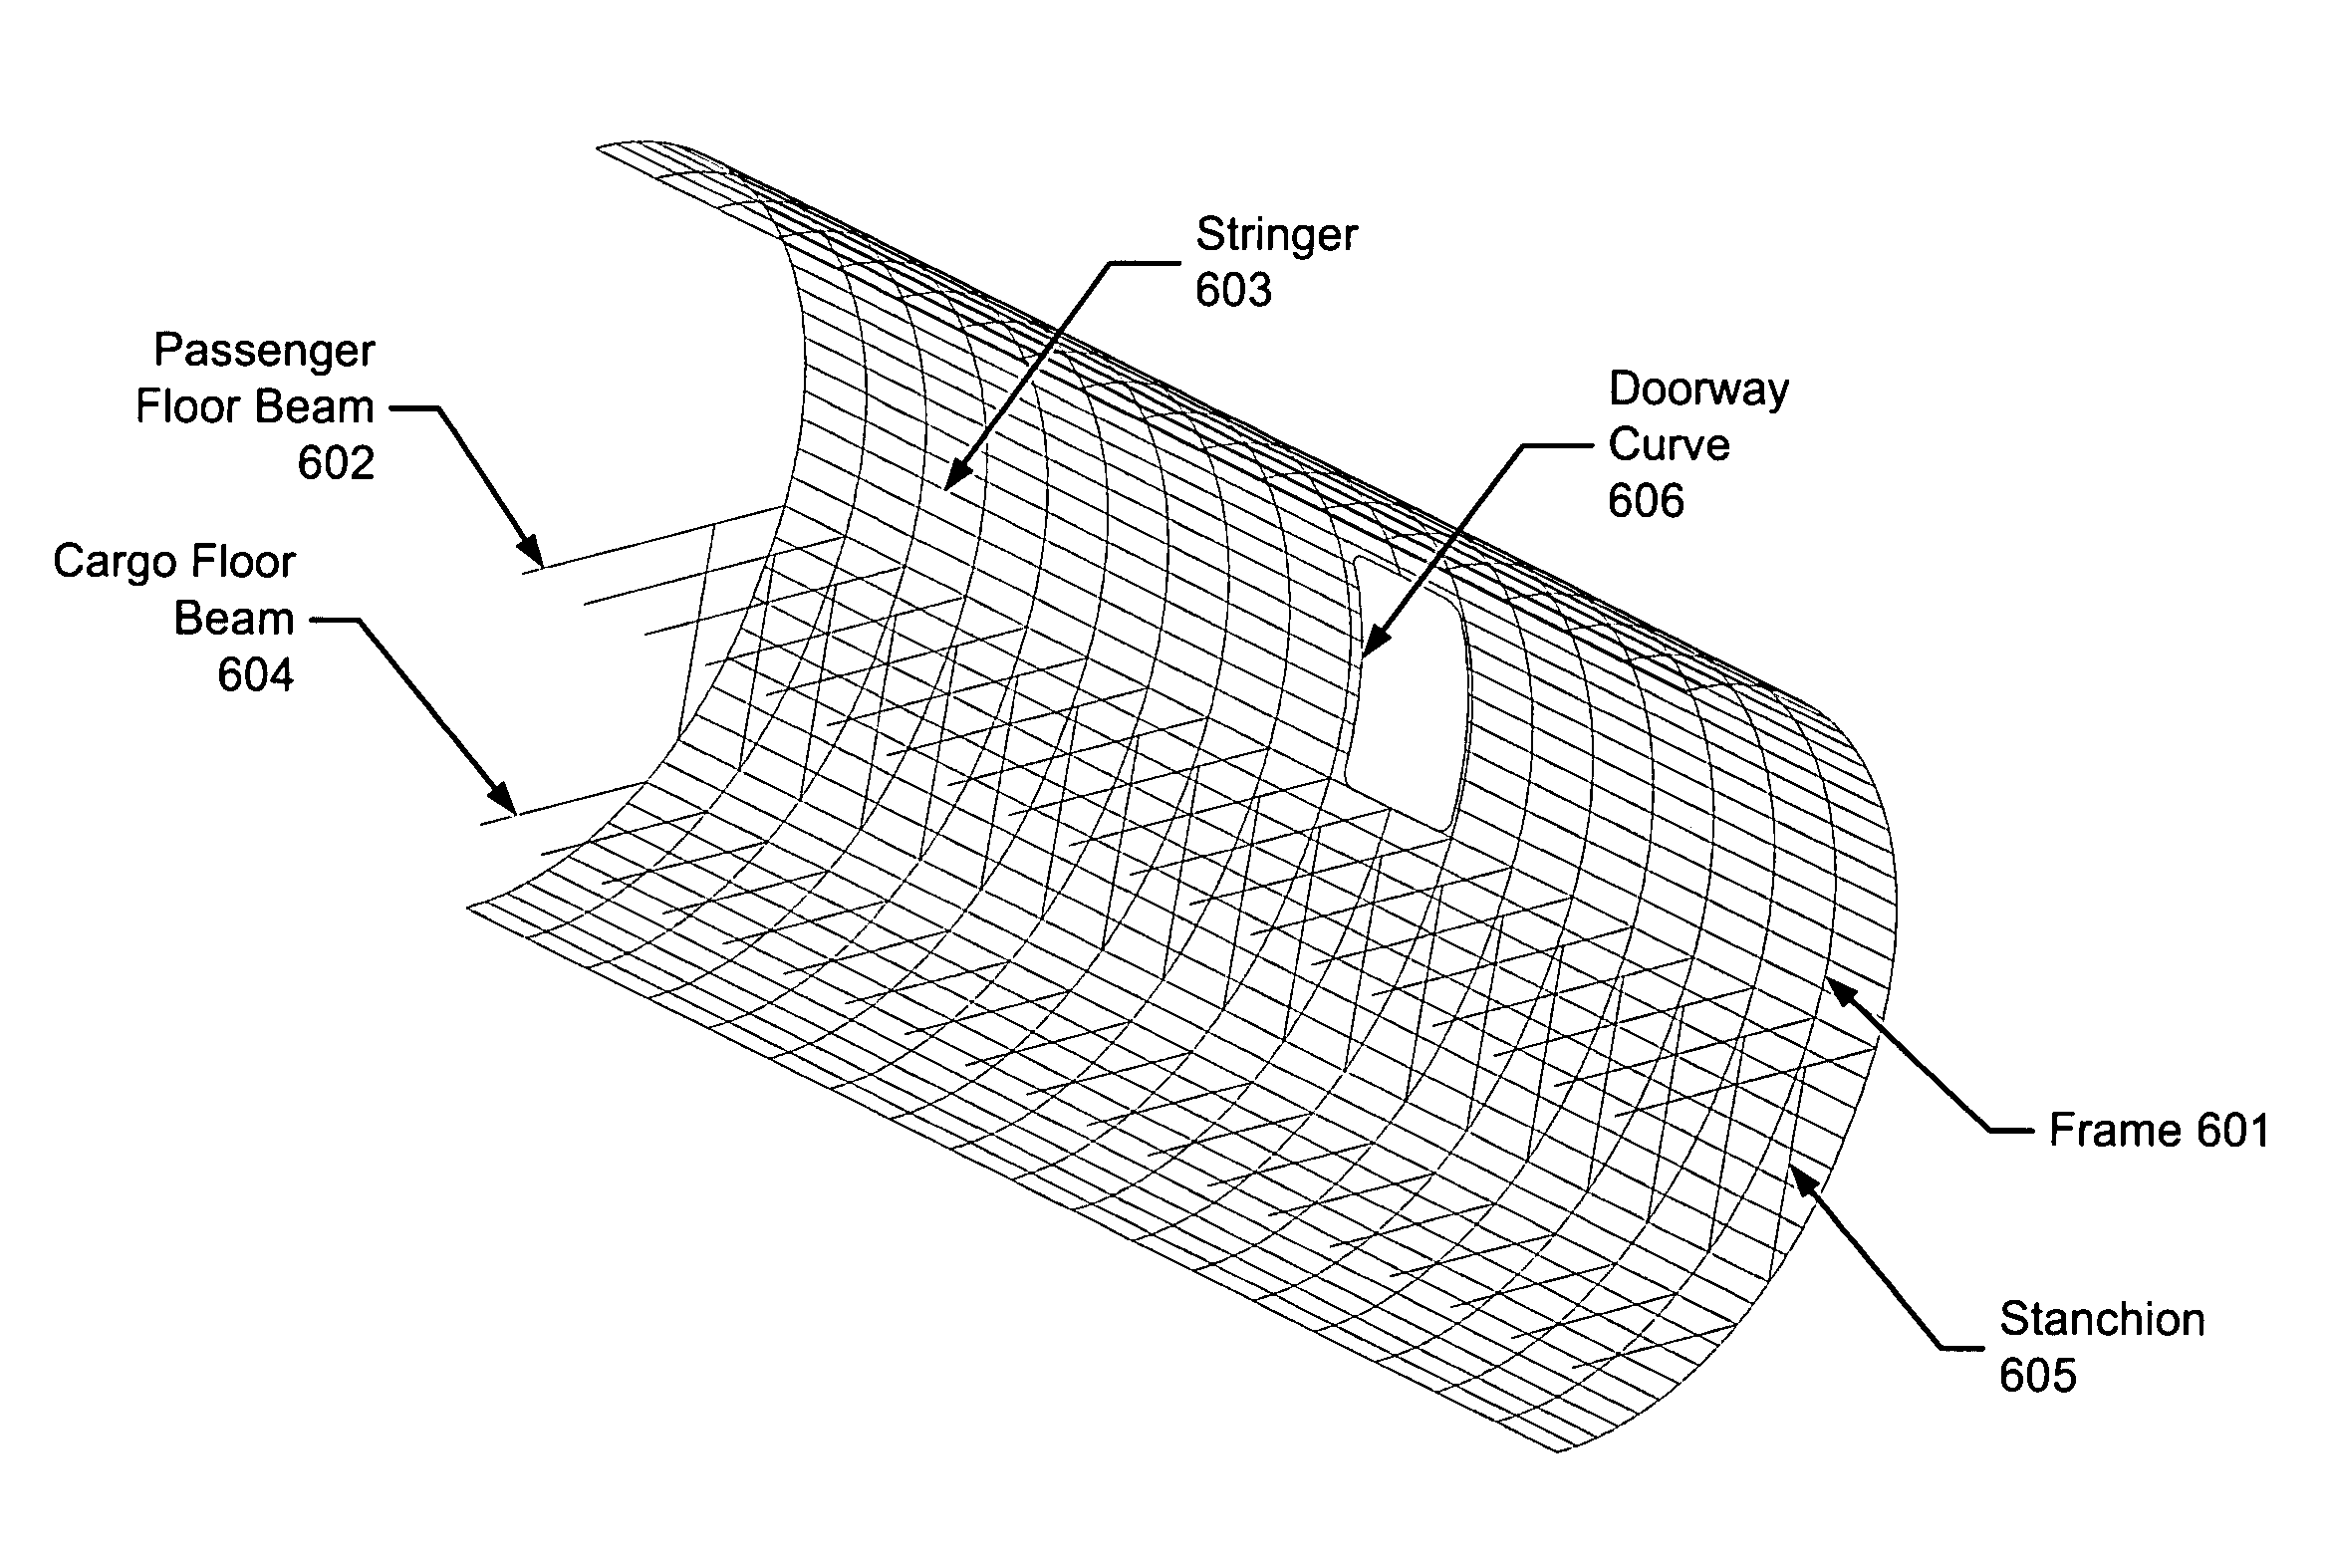 Systems and methods for automatically generating 3D wireframe CAD models of aircraft